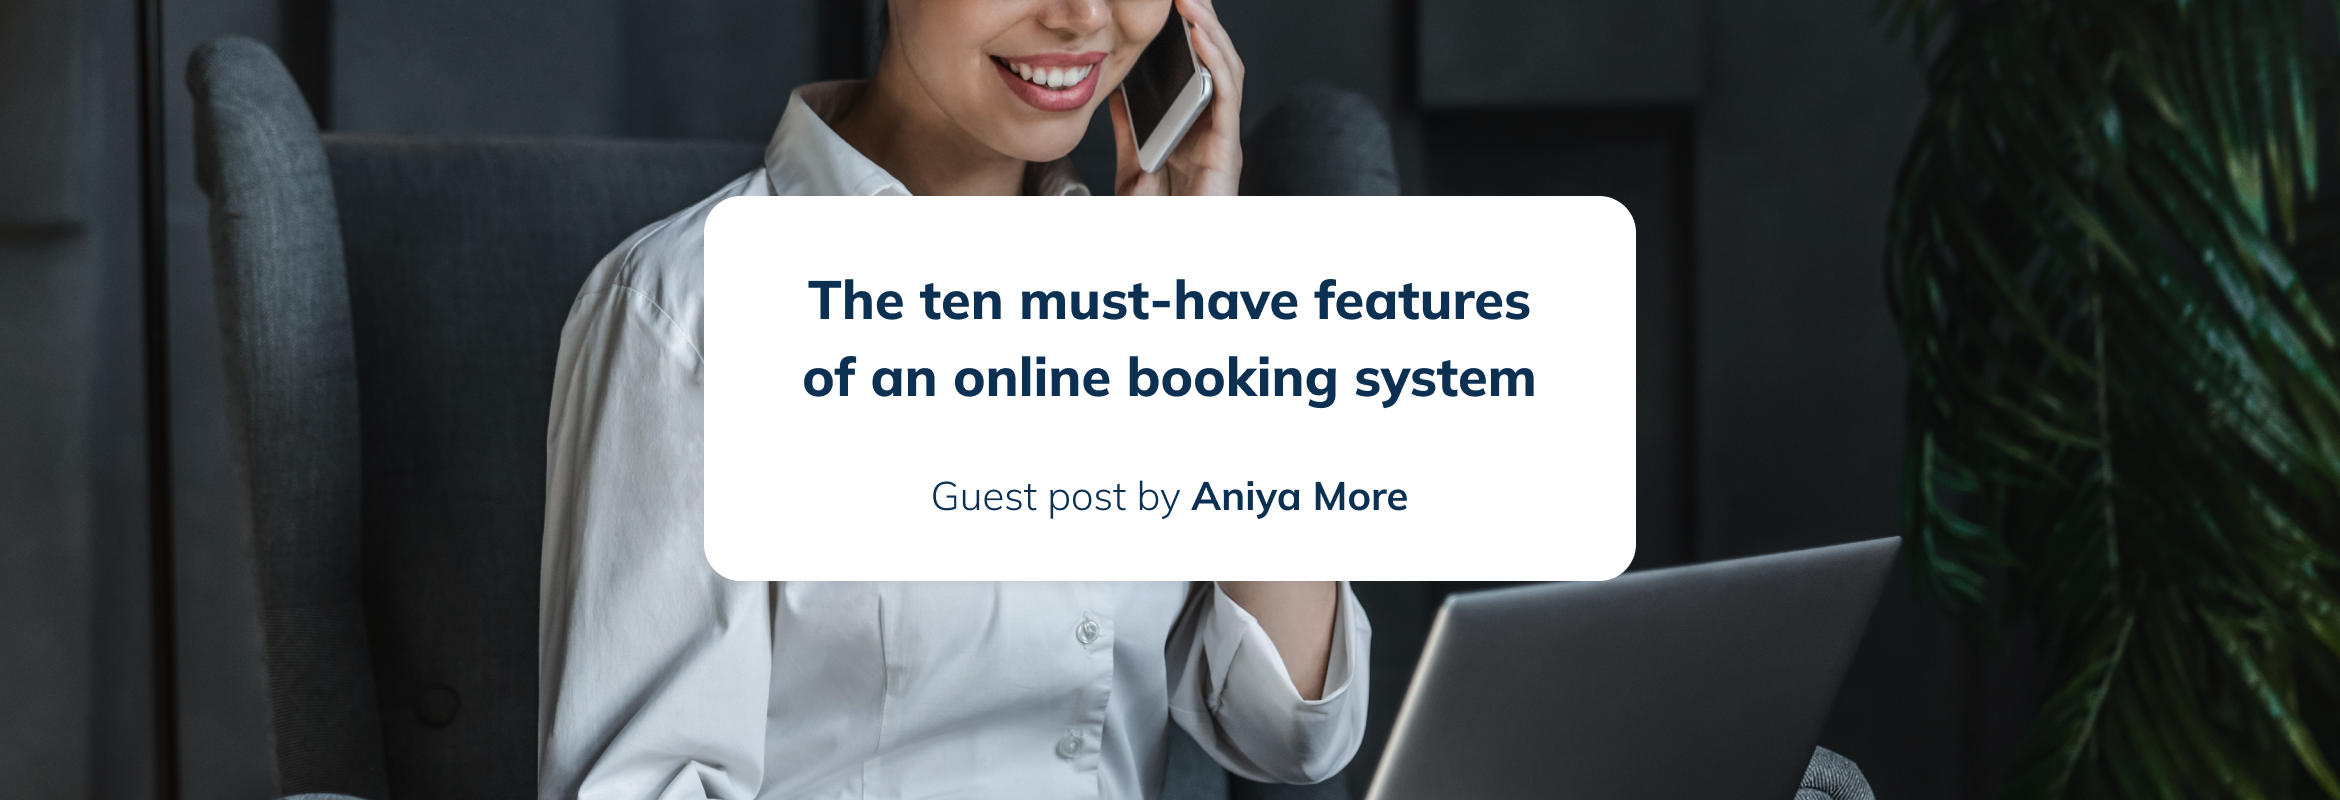 10 must-have features of an online booking system